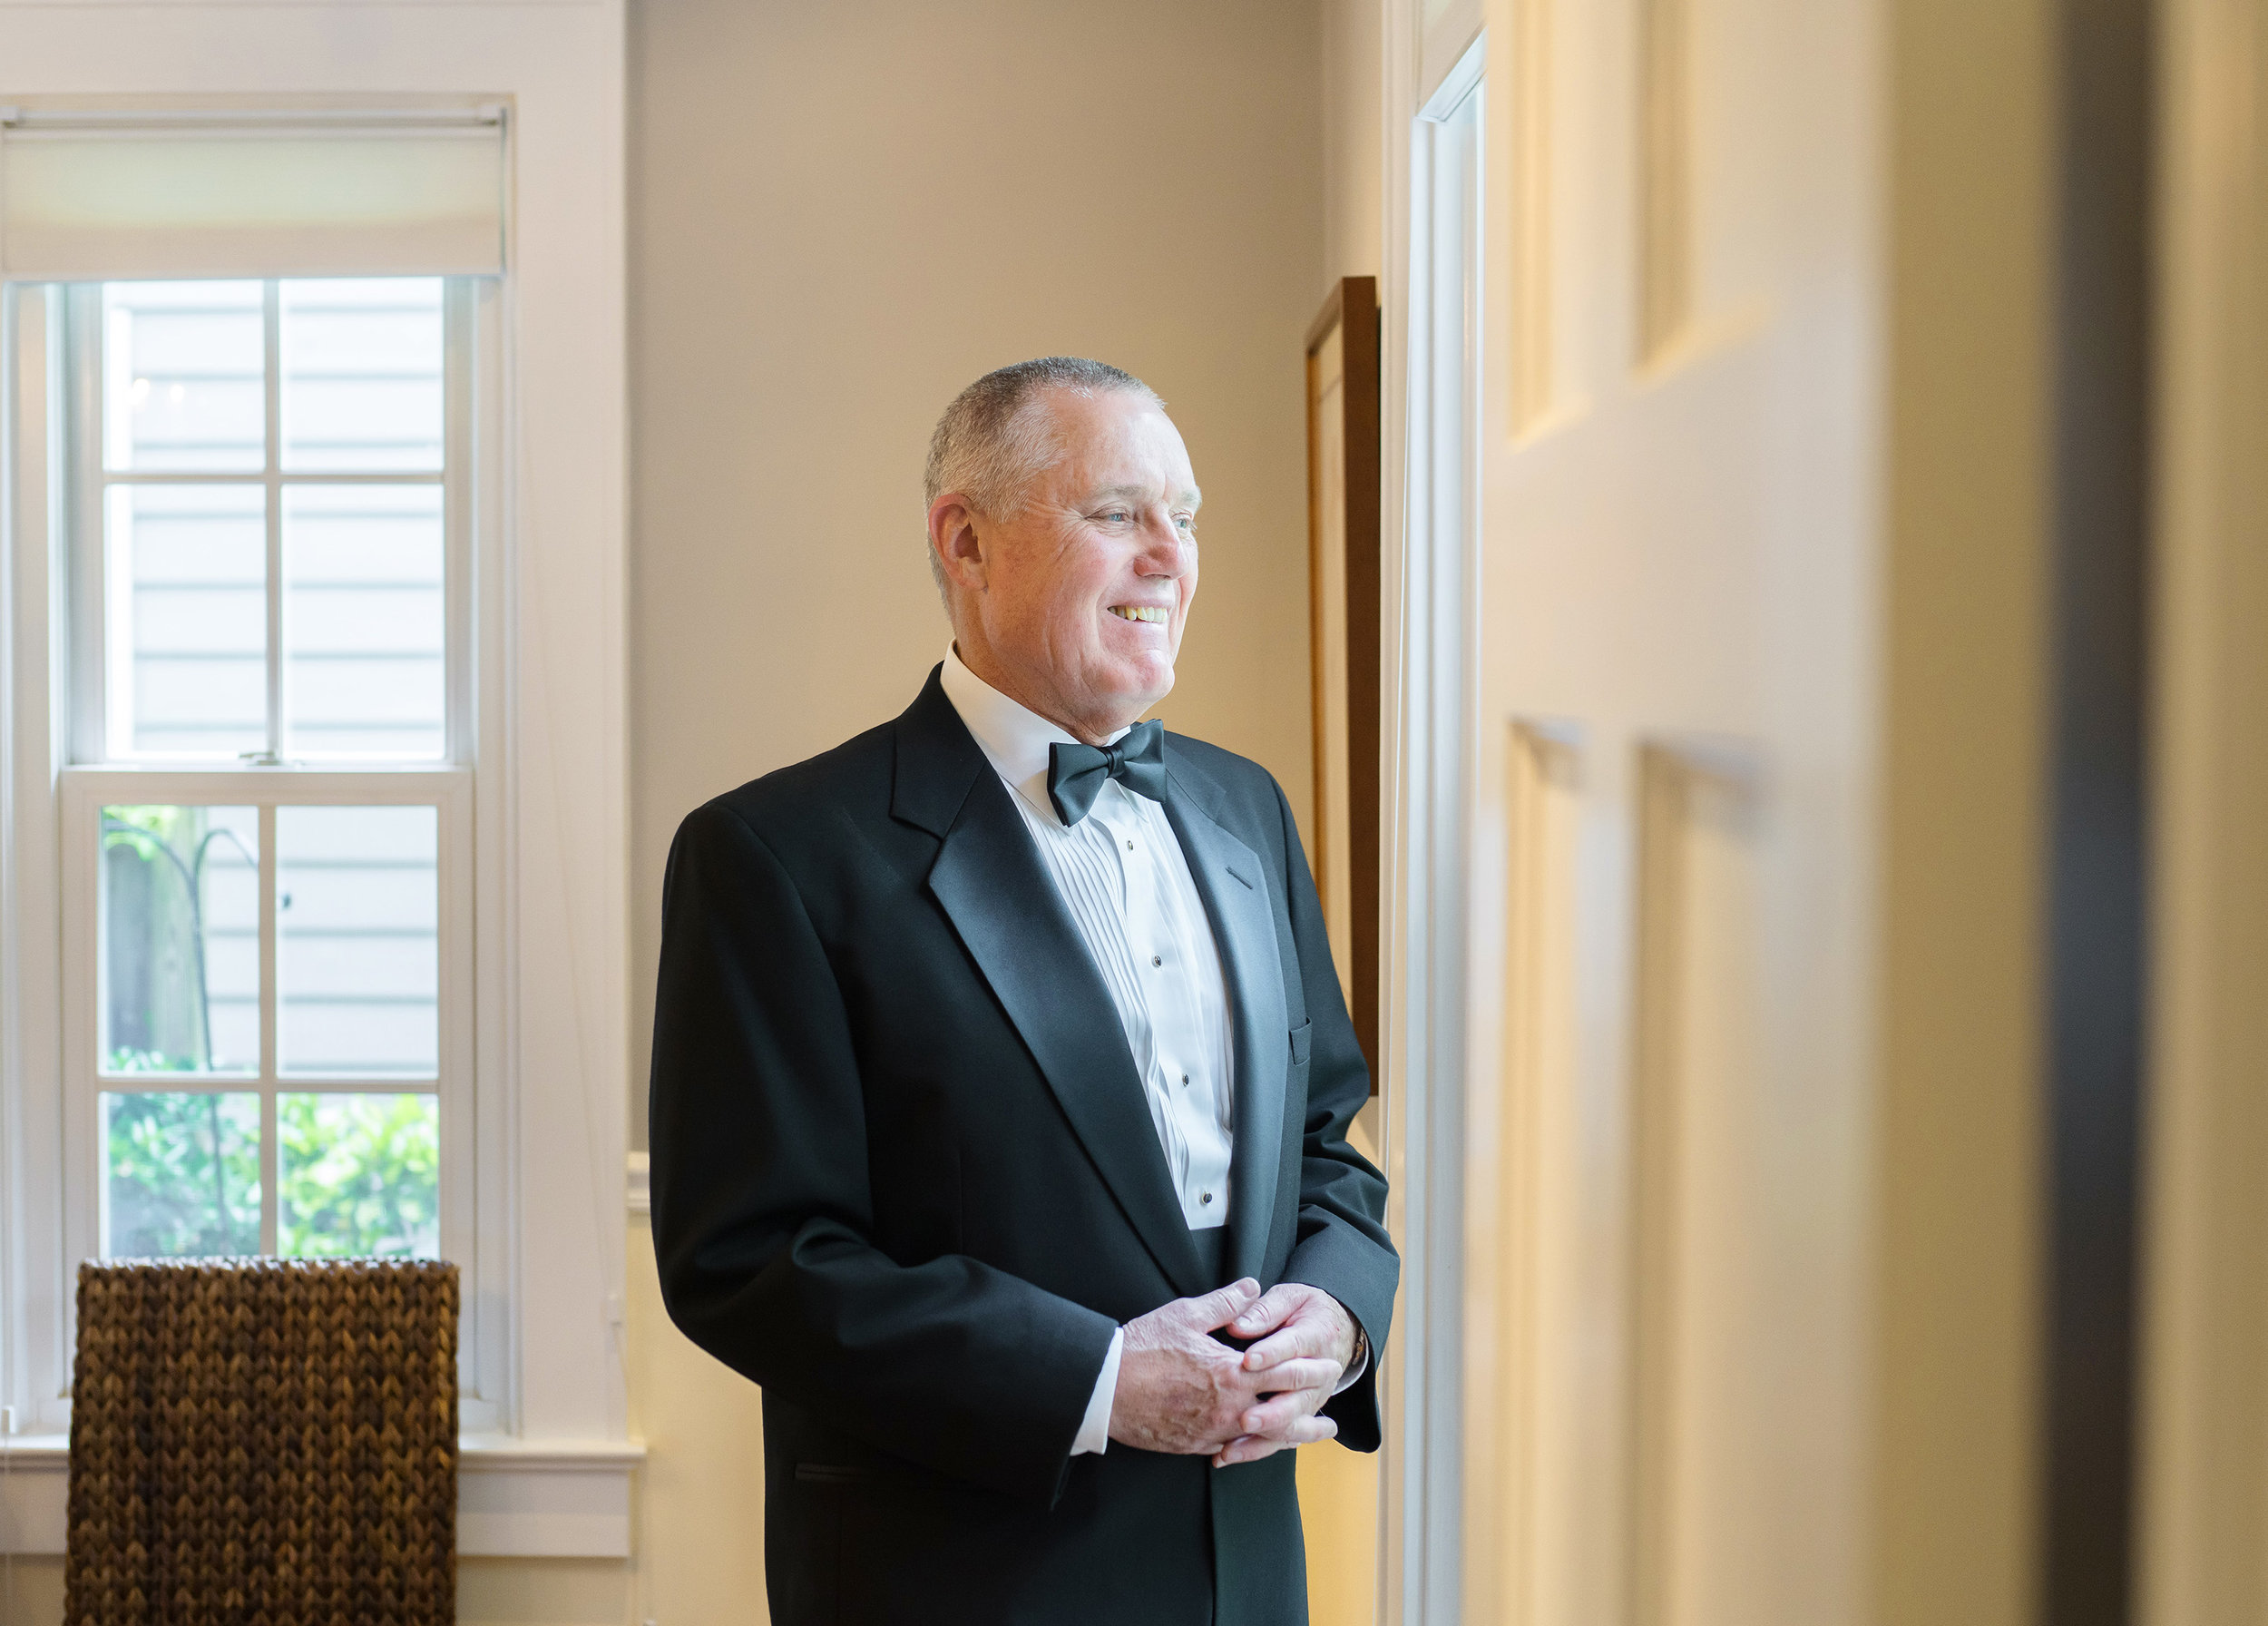 Father of the bride classic portraits in bethesda maryland 